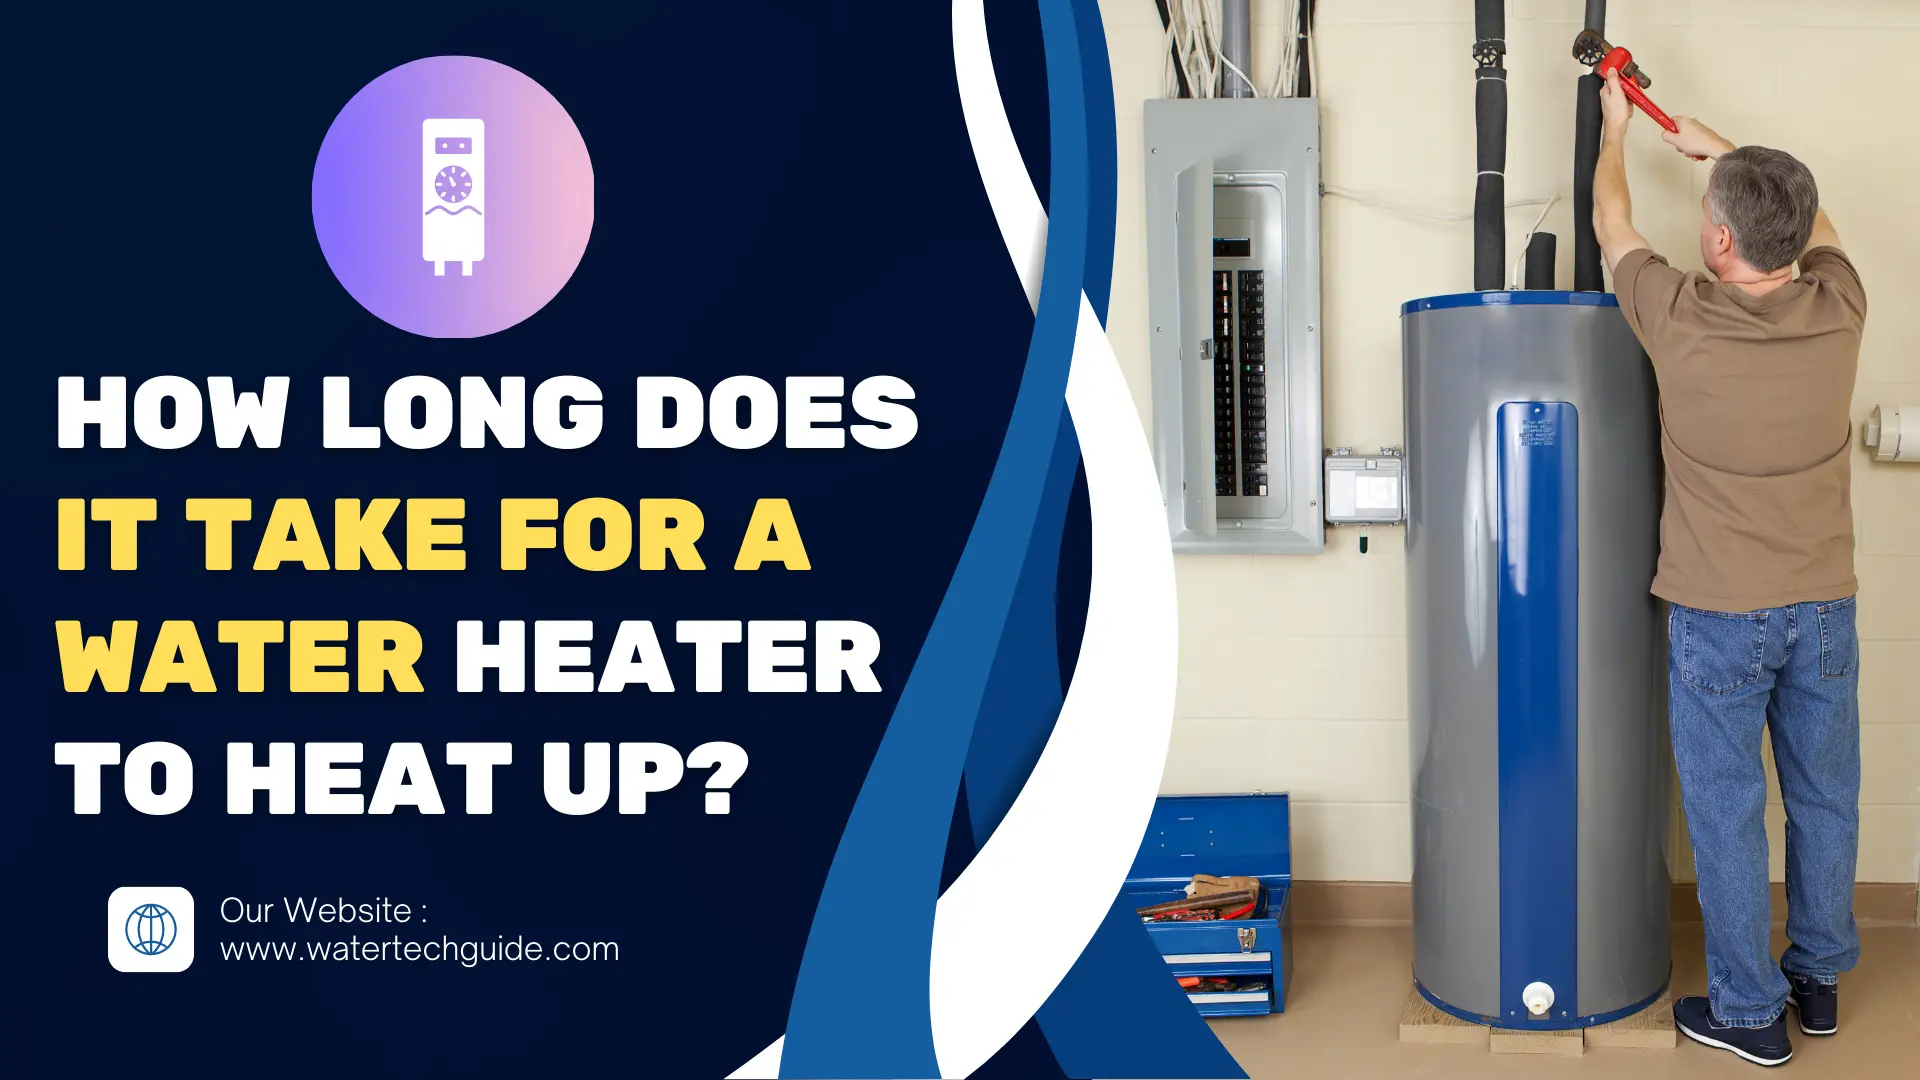 How Long Does It Take for a Water Heater to Heat Up